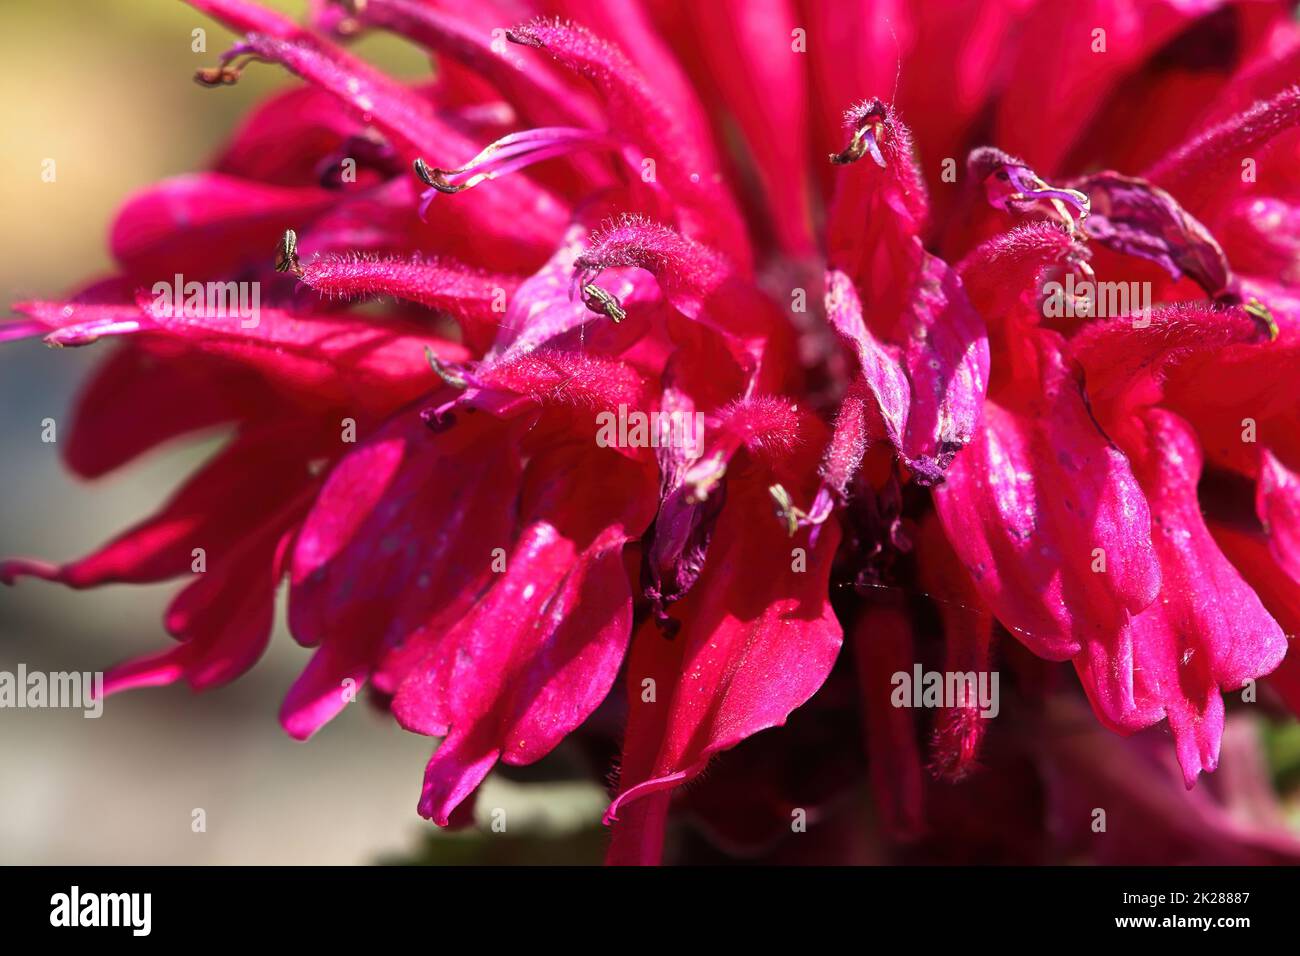 Macro view of the red petals on a beebalm plant Stock Photo